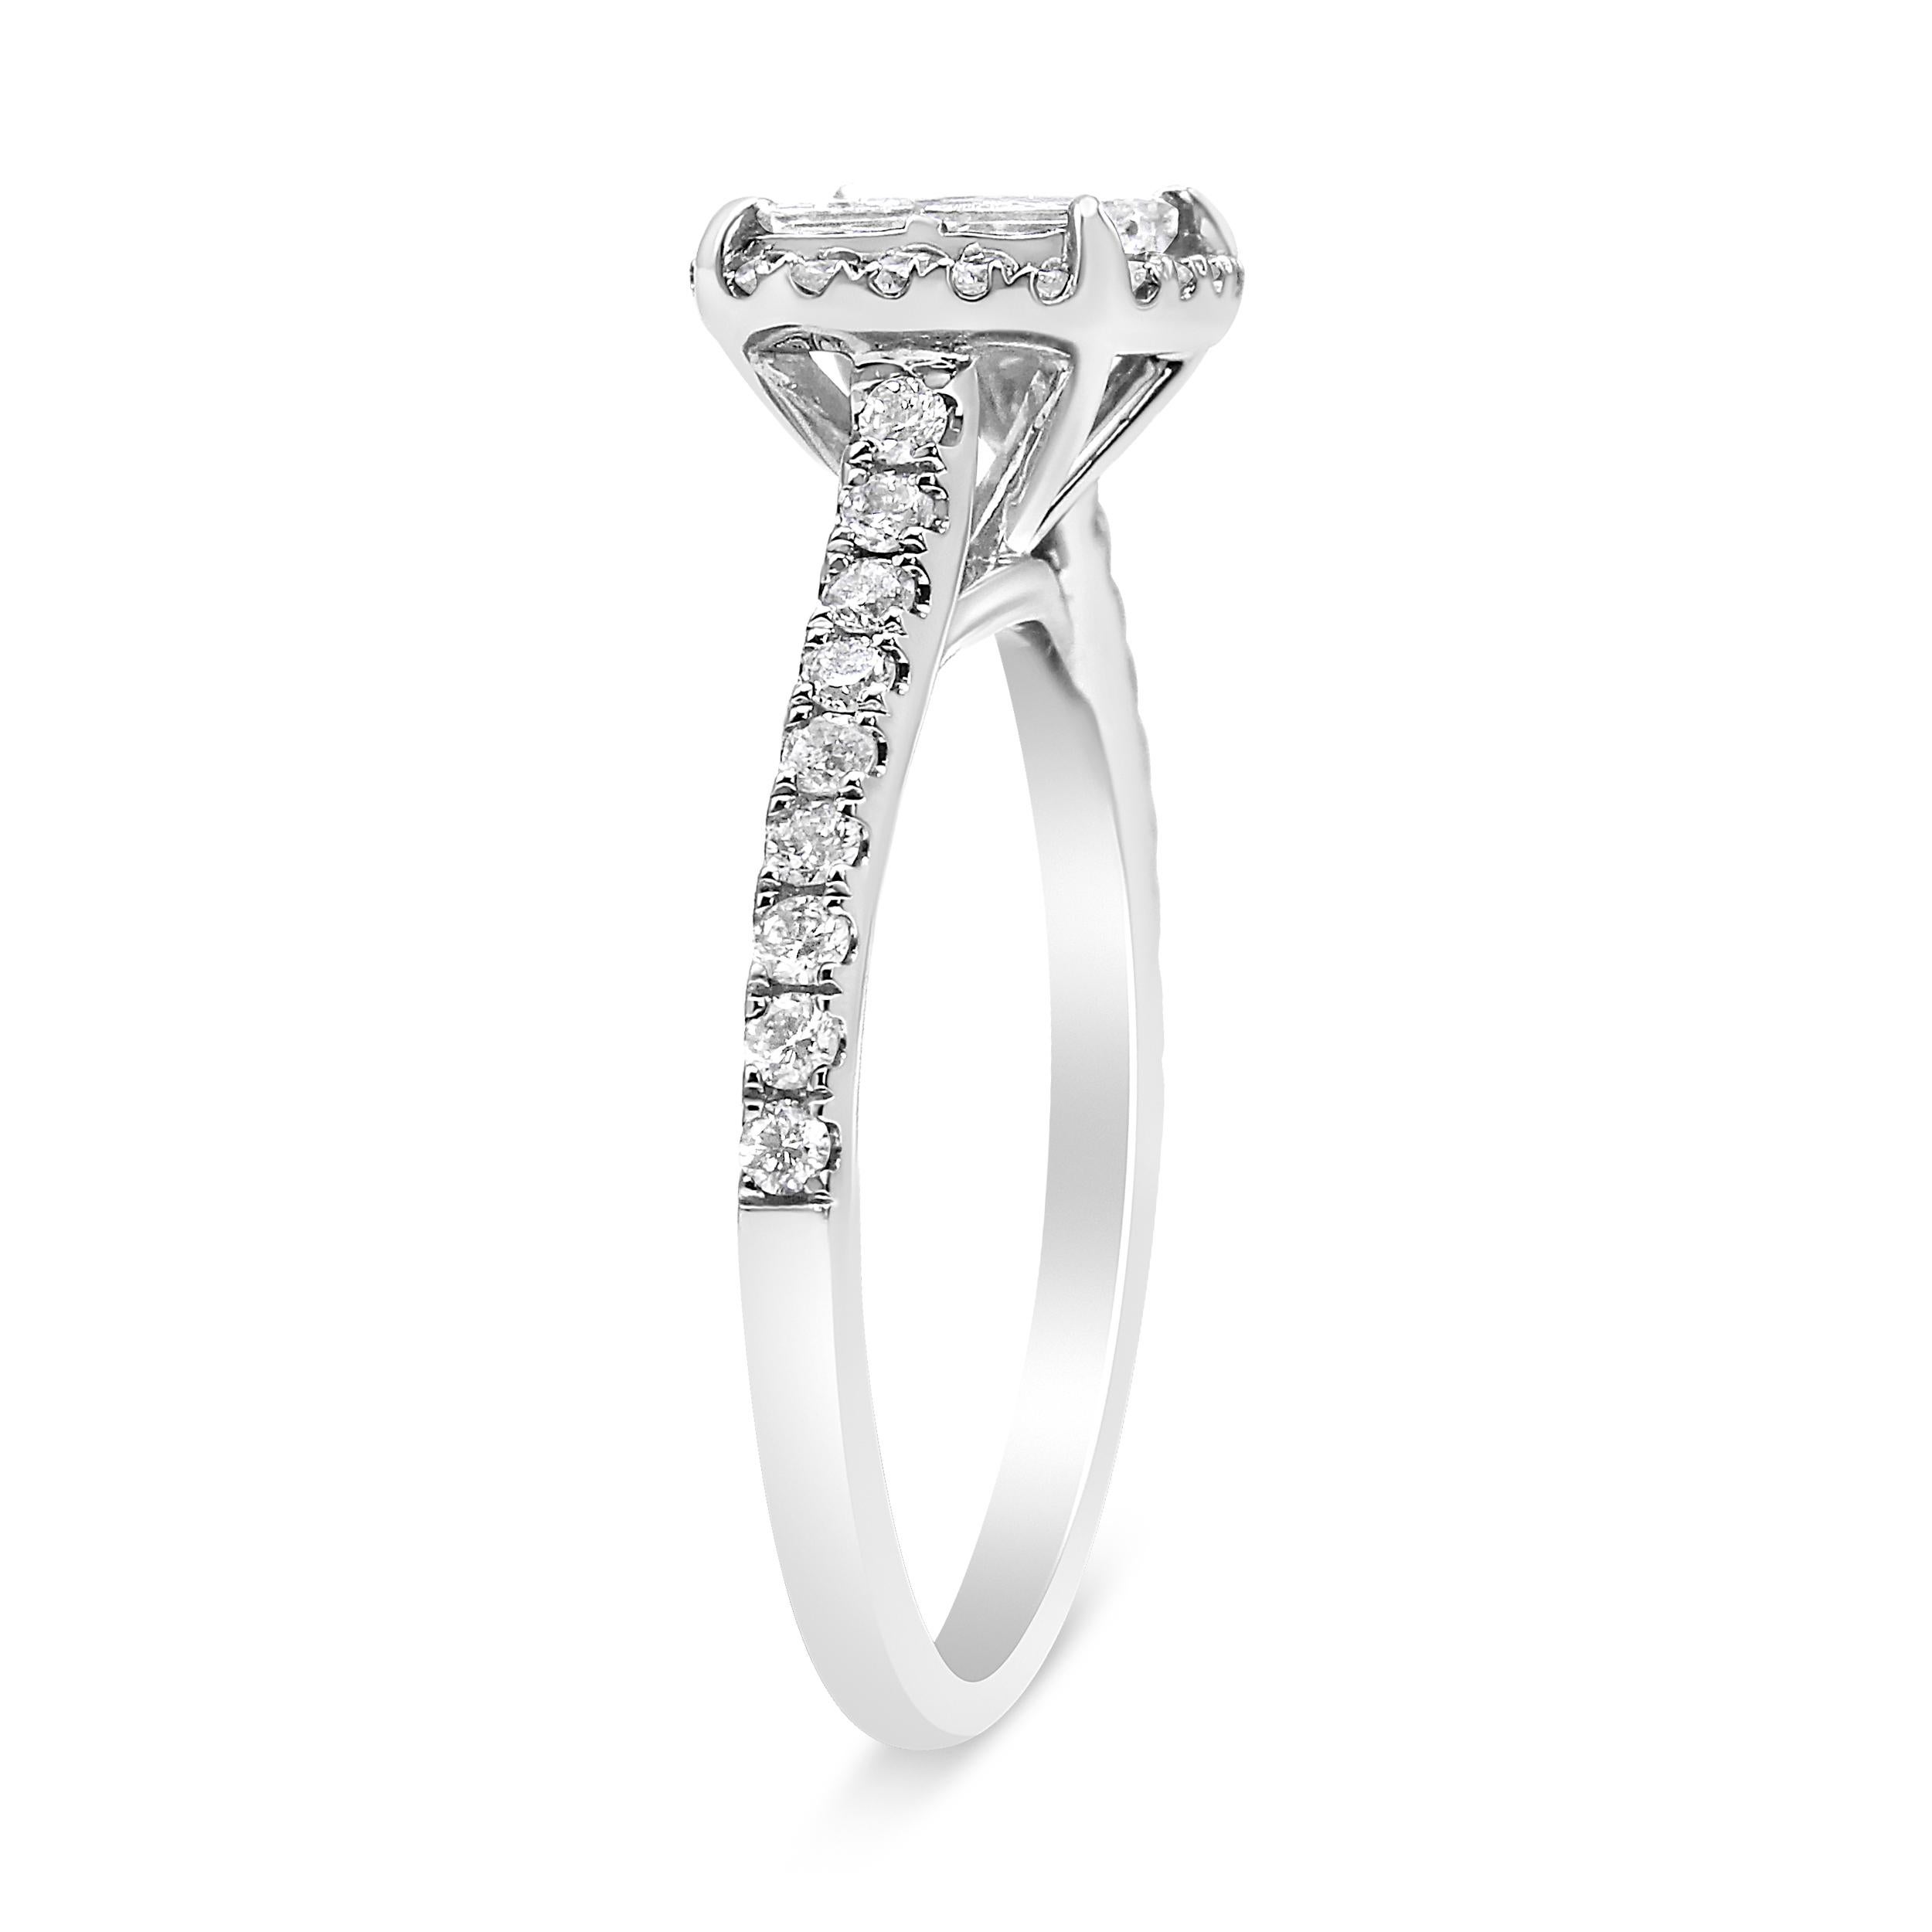 1.0 ct engagement rings